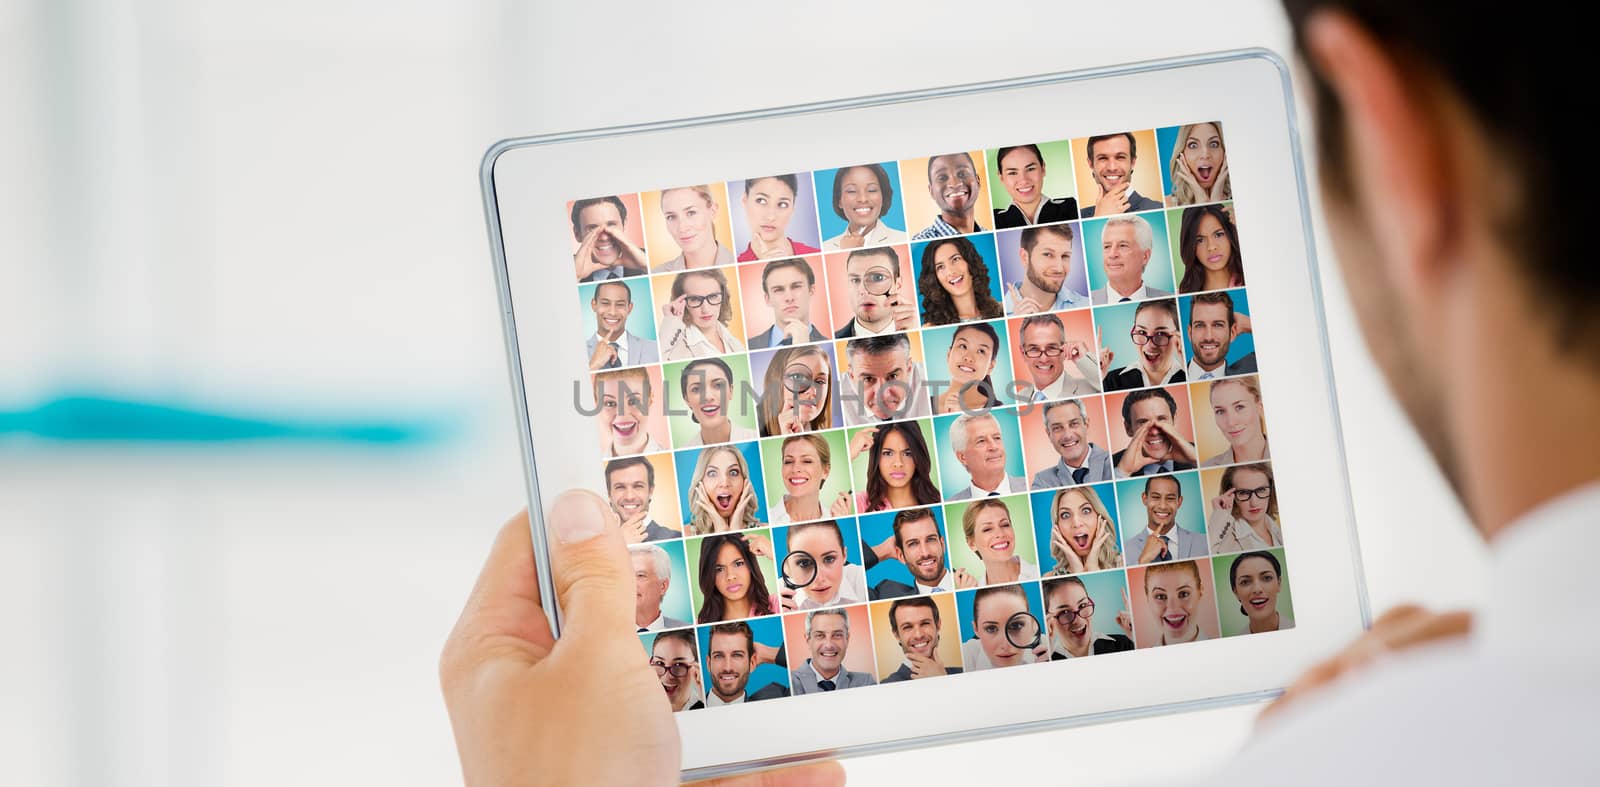 People collage portrait very wide against cropped image of businessman holding digital tablet